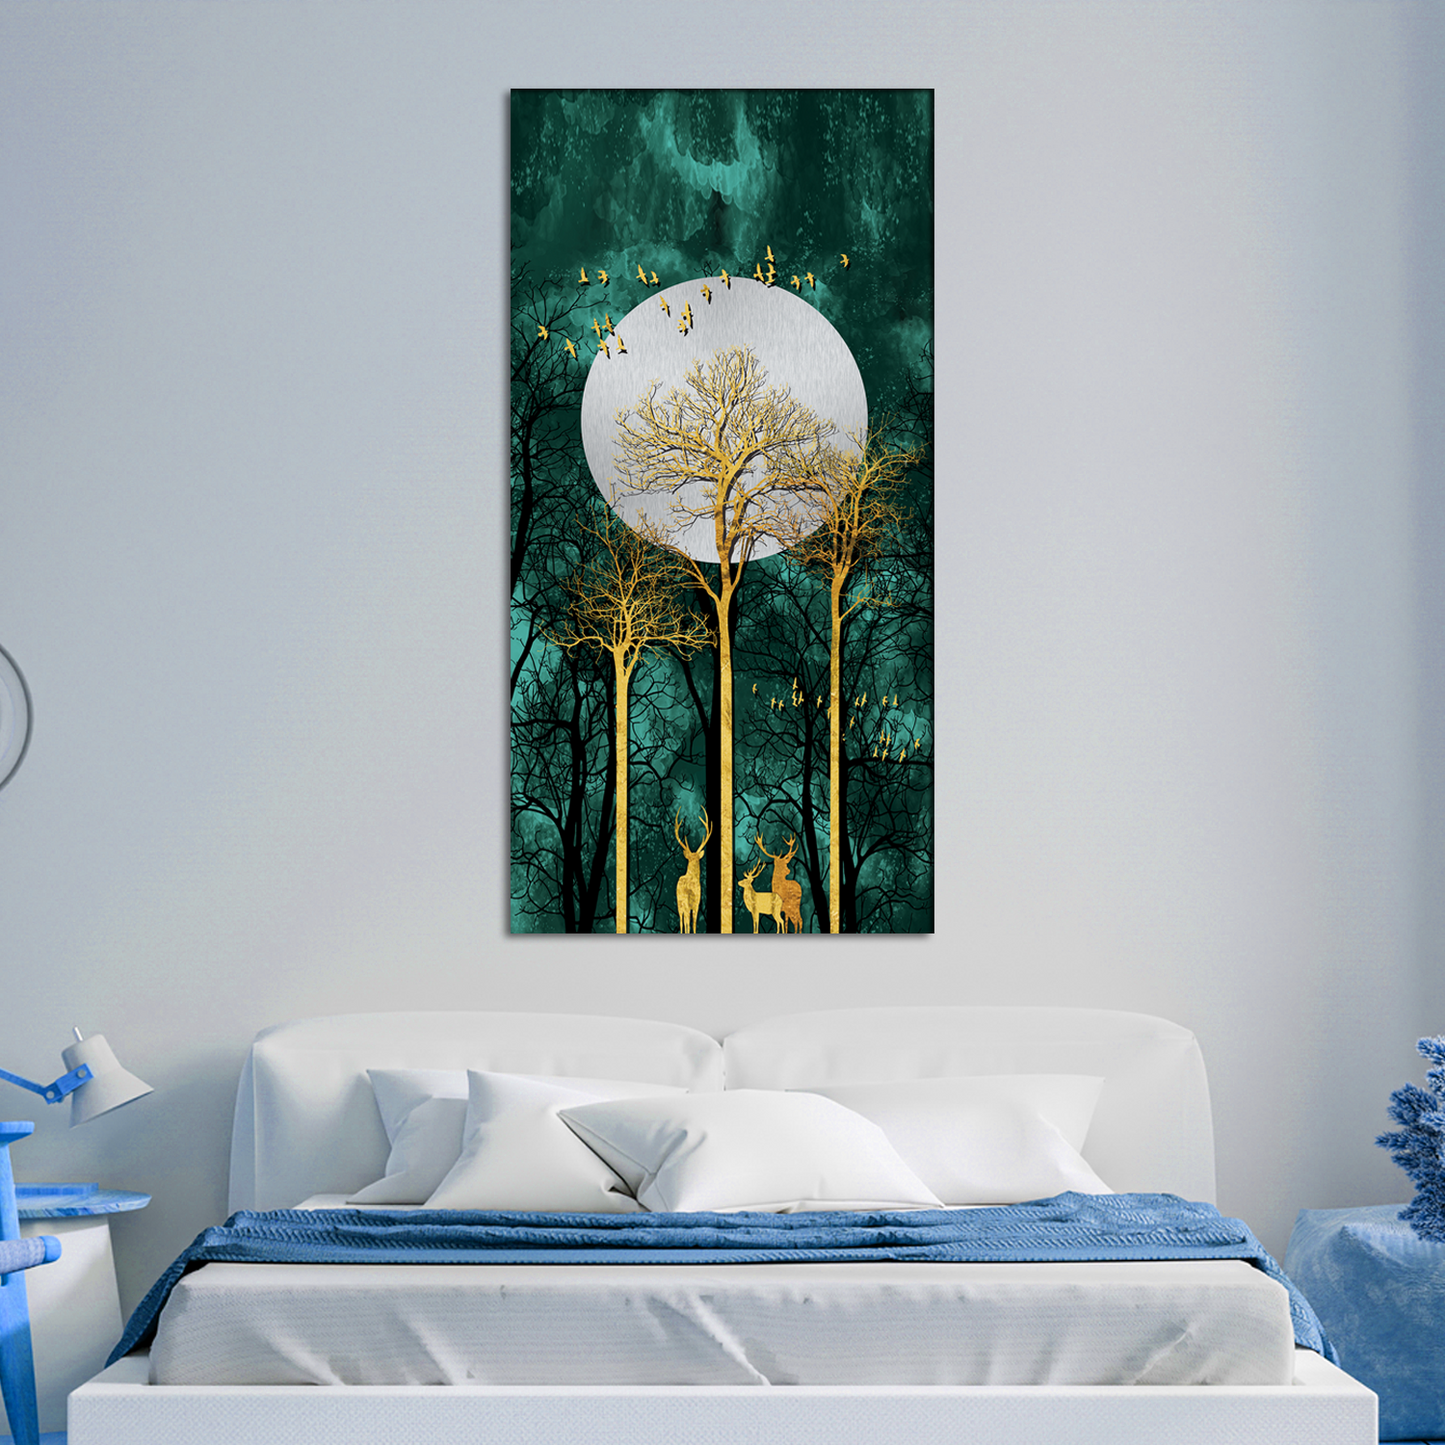 Moon and Golden Flying Birds with deer's Canvas Wall Painting